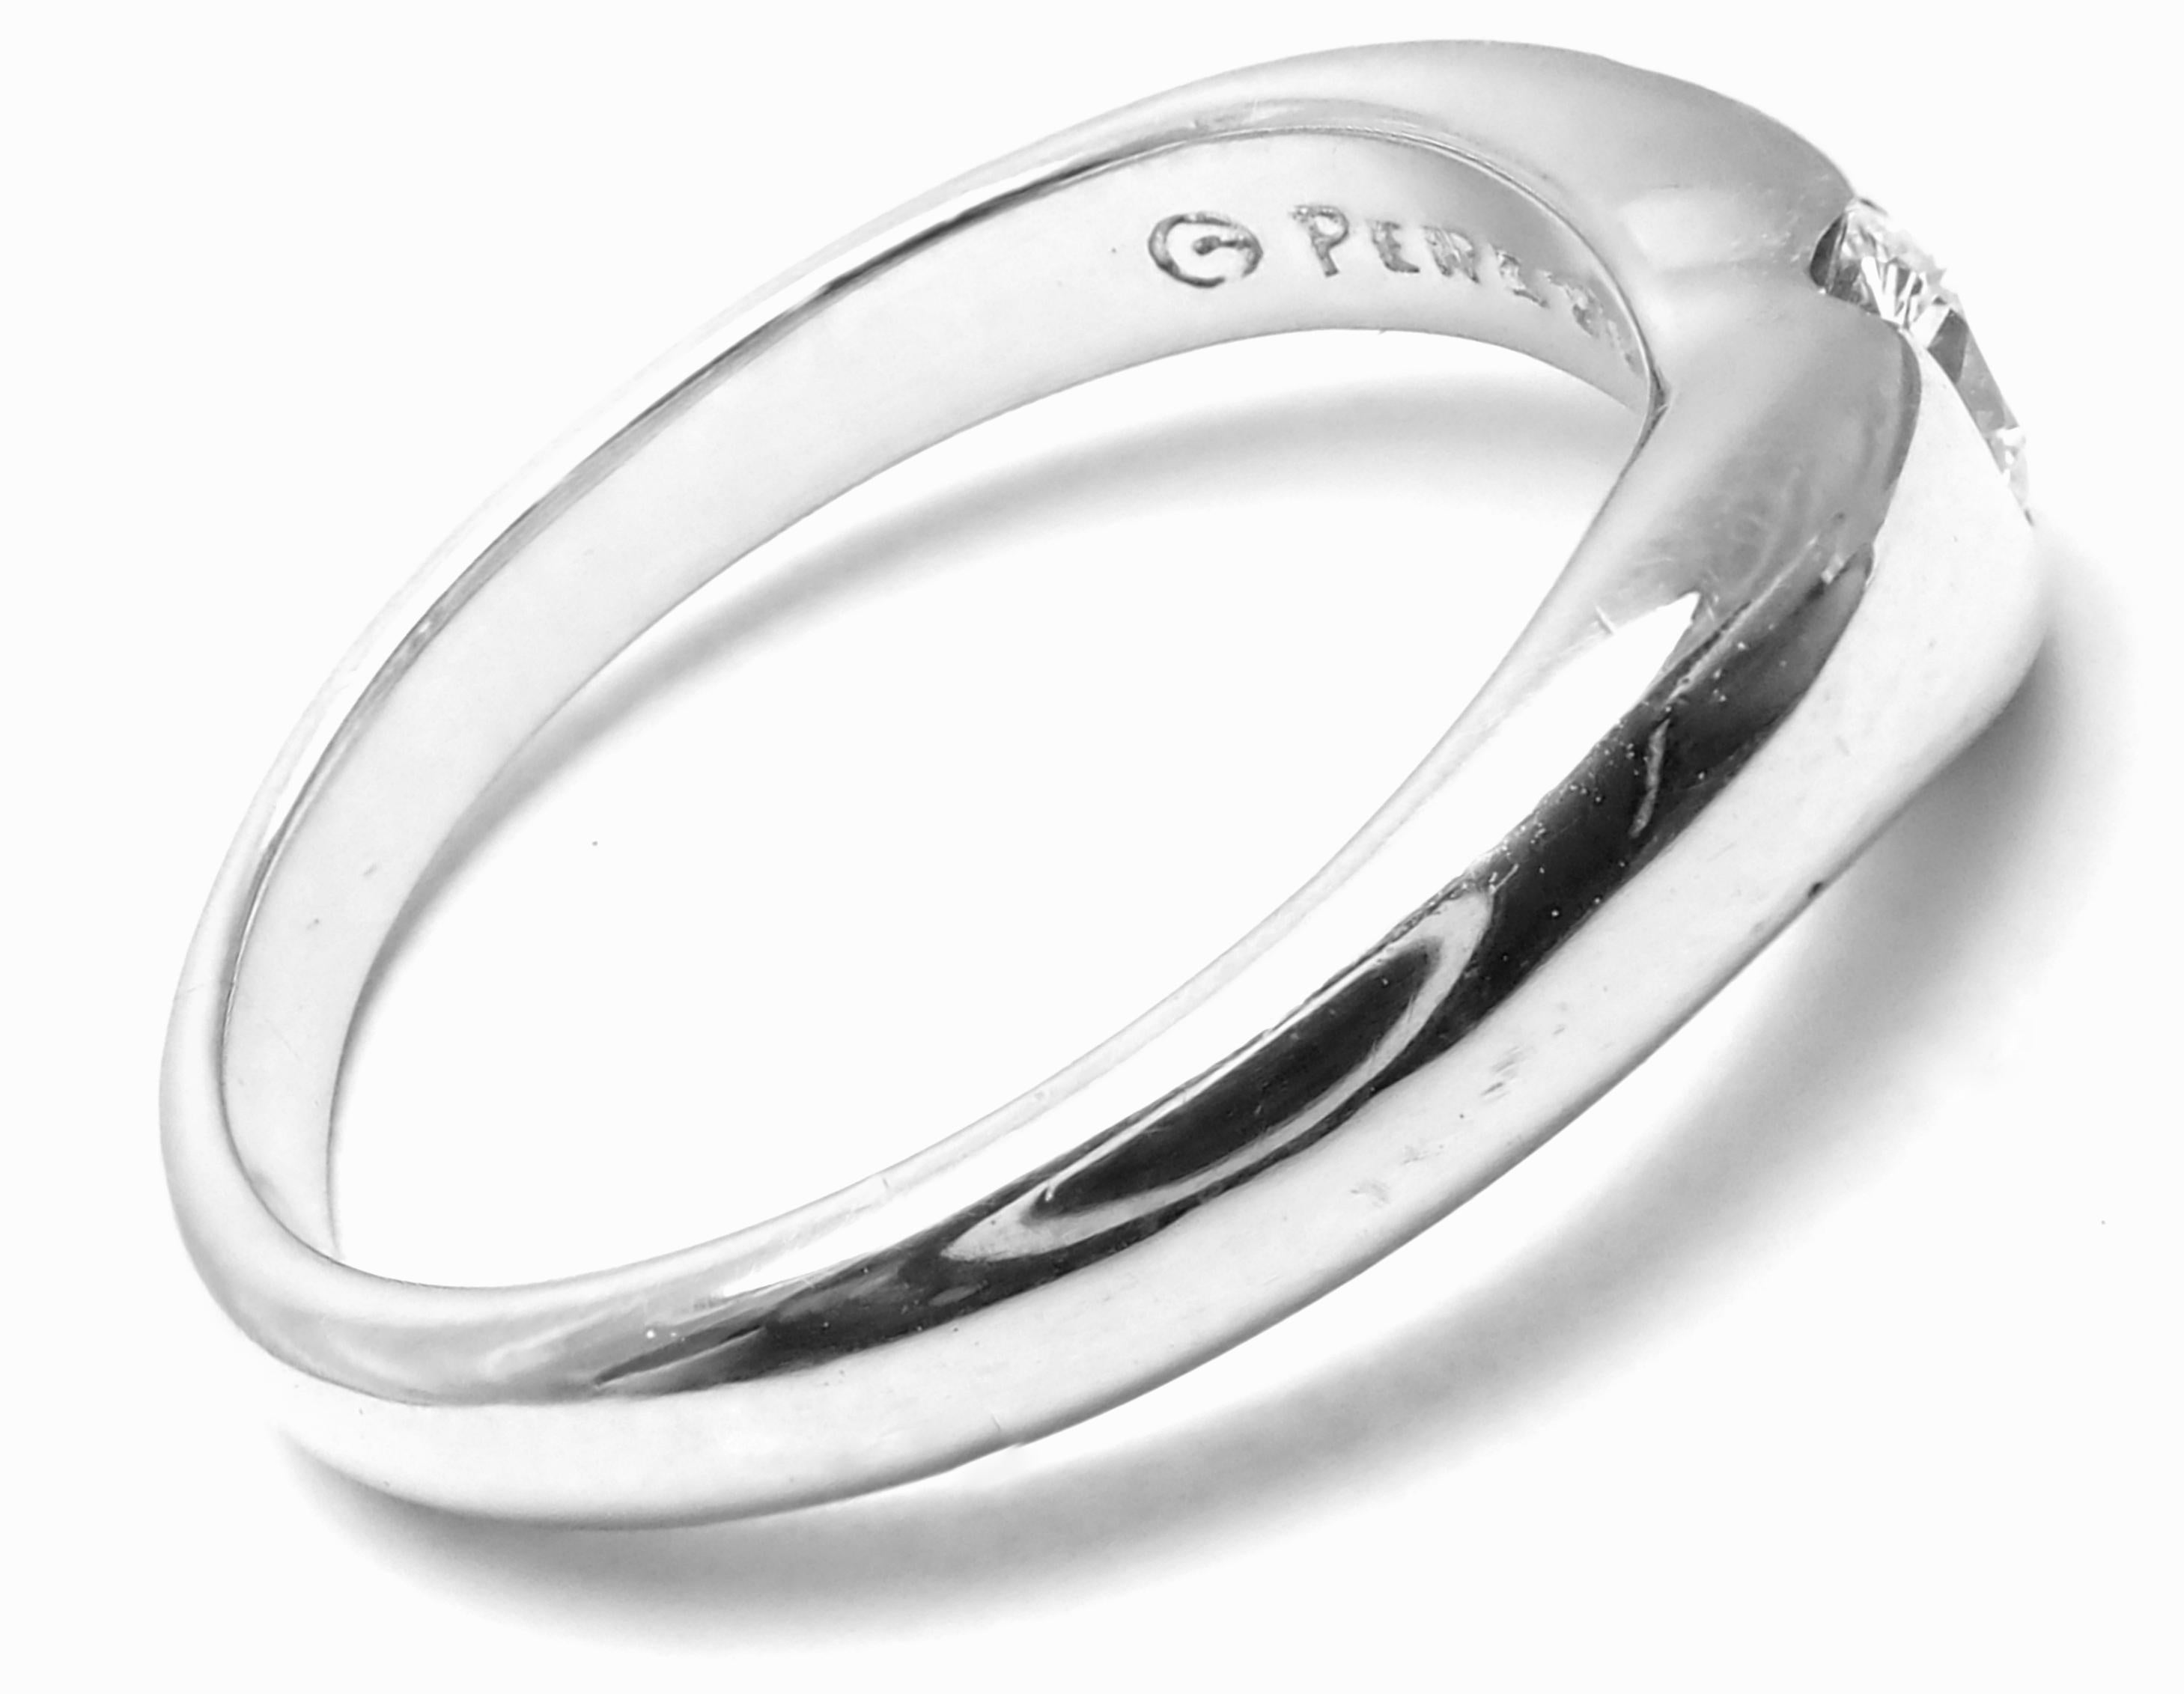 Platinum Diamond Ring designed by Elsa Peretti for Tiffany & Co. 
With 1 round brilliant cut diamond VS1 clarity, G color total weight approx. 0.18ct 
Details:
Ring Size: 6.5
Weight: 6 grams
Stamped Hallmarks: Peretti Tiffany & Co 750
*Free Shipping